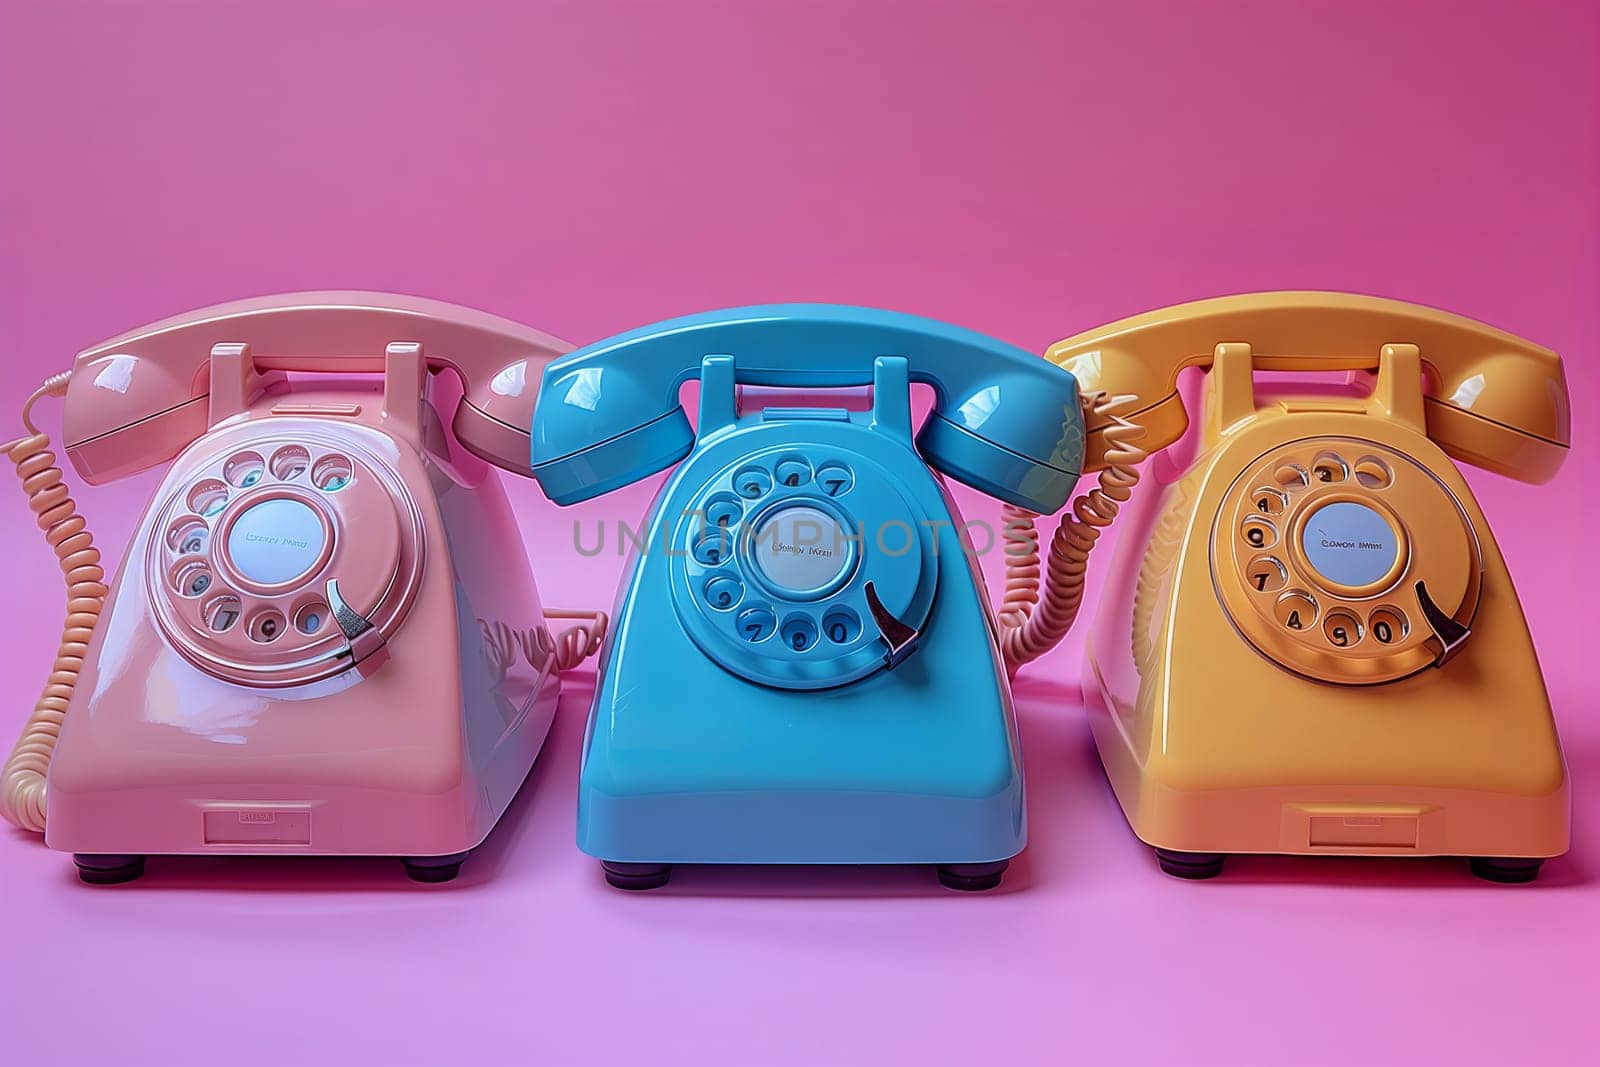 Three vintage telephones in shades of purple, pink, and magenta are displayed on an electric blue background. These electronic gadgets sit next to each other, creating a nostalgic feel